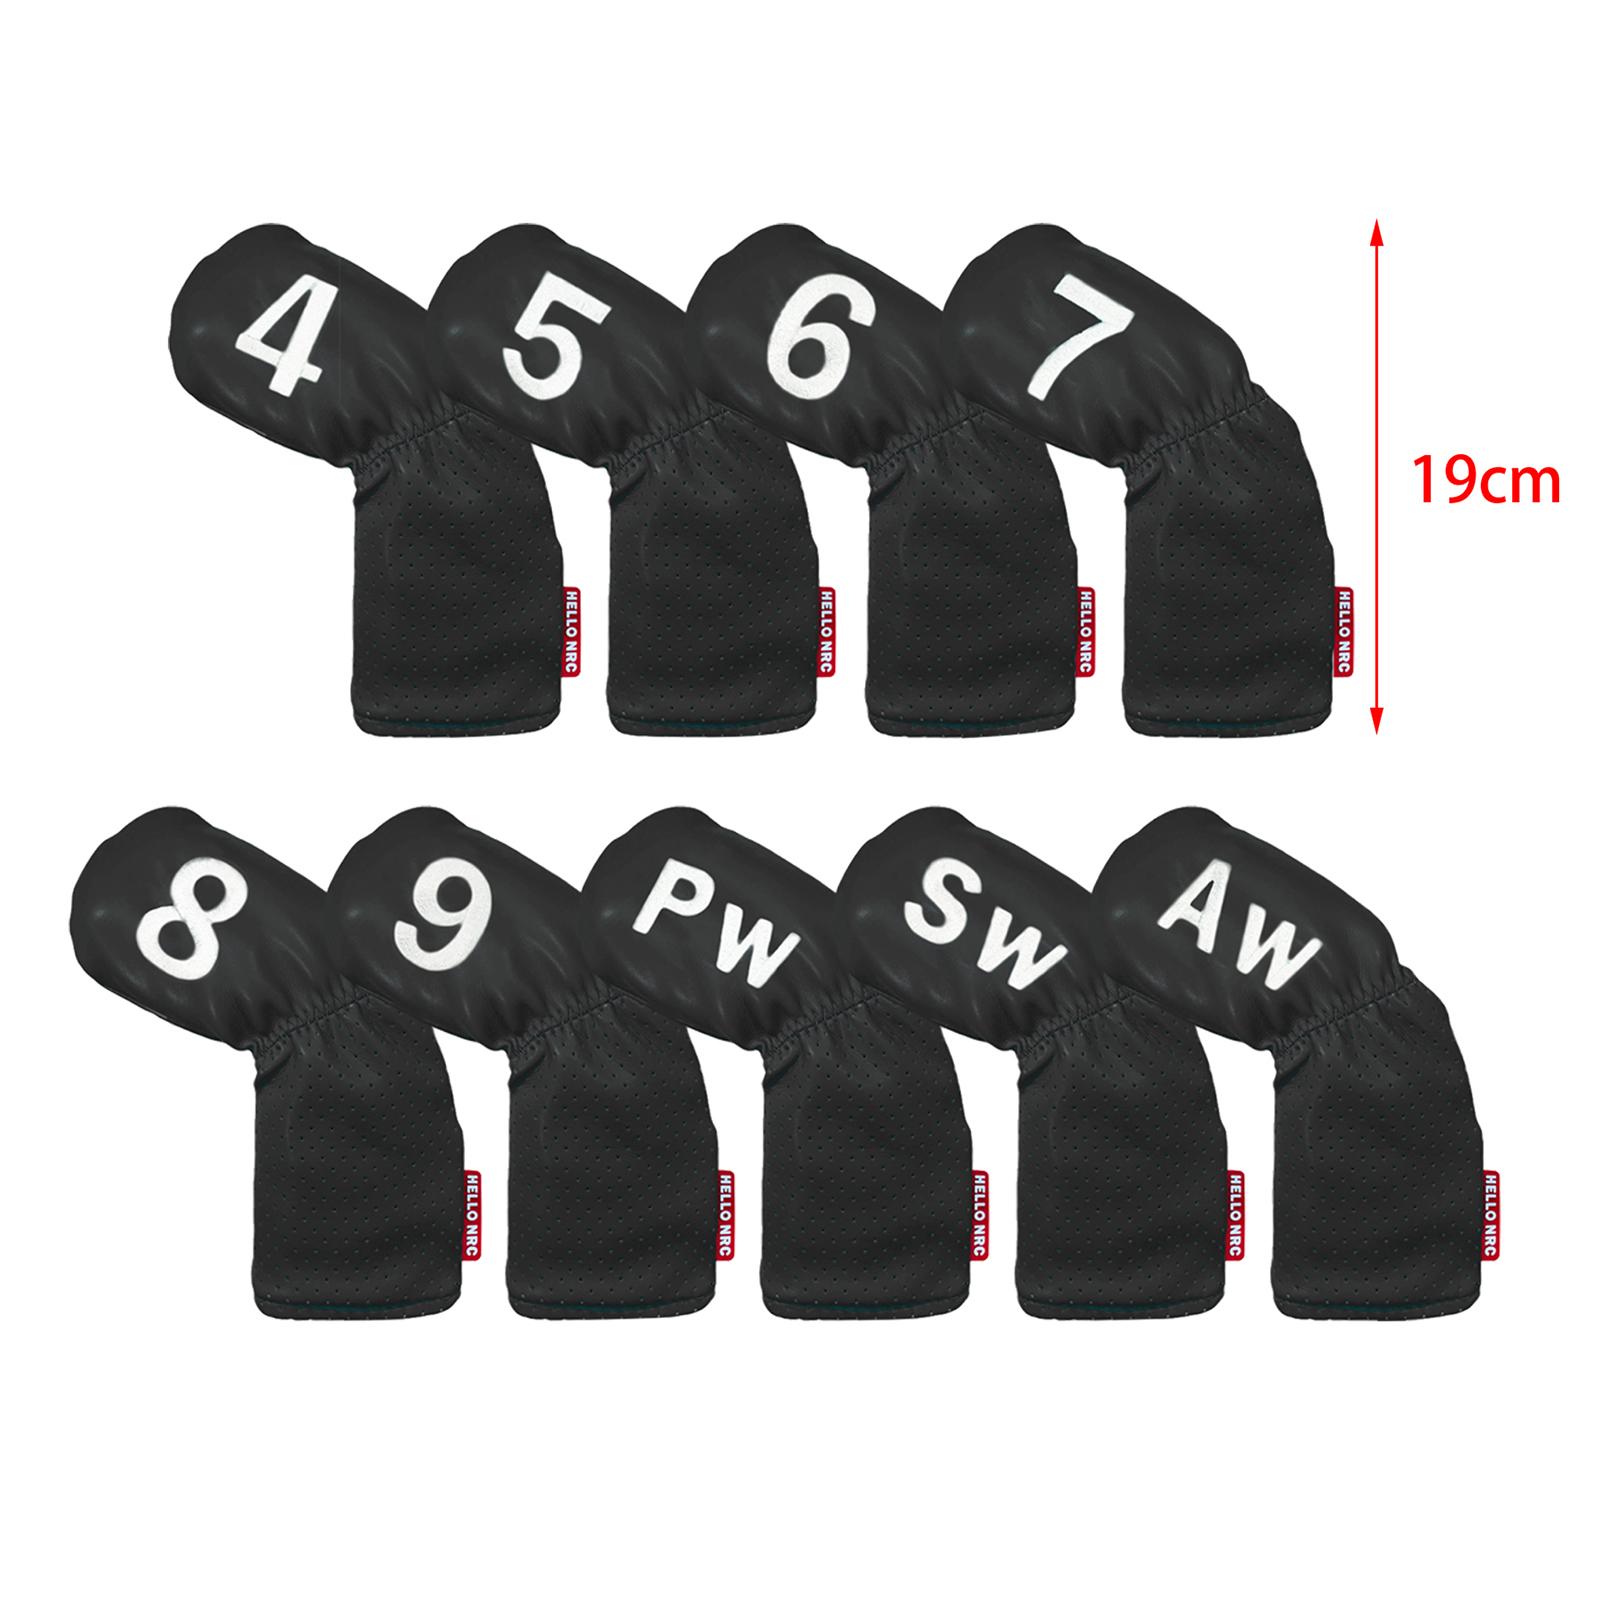 9Pcs Golf Iron Headcover Set Long Neck Fits All Brands Accessories Black